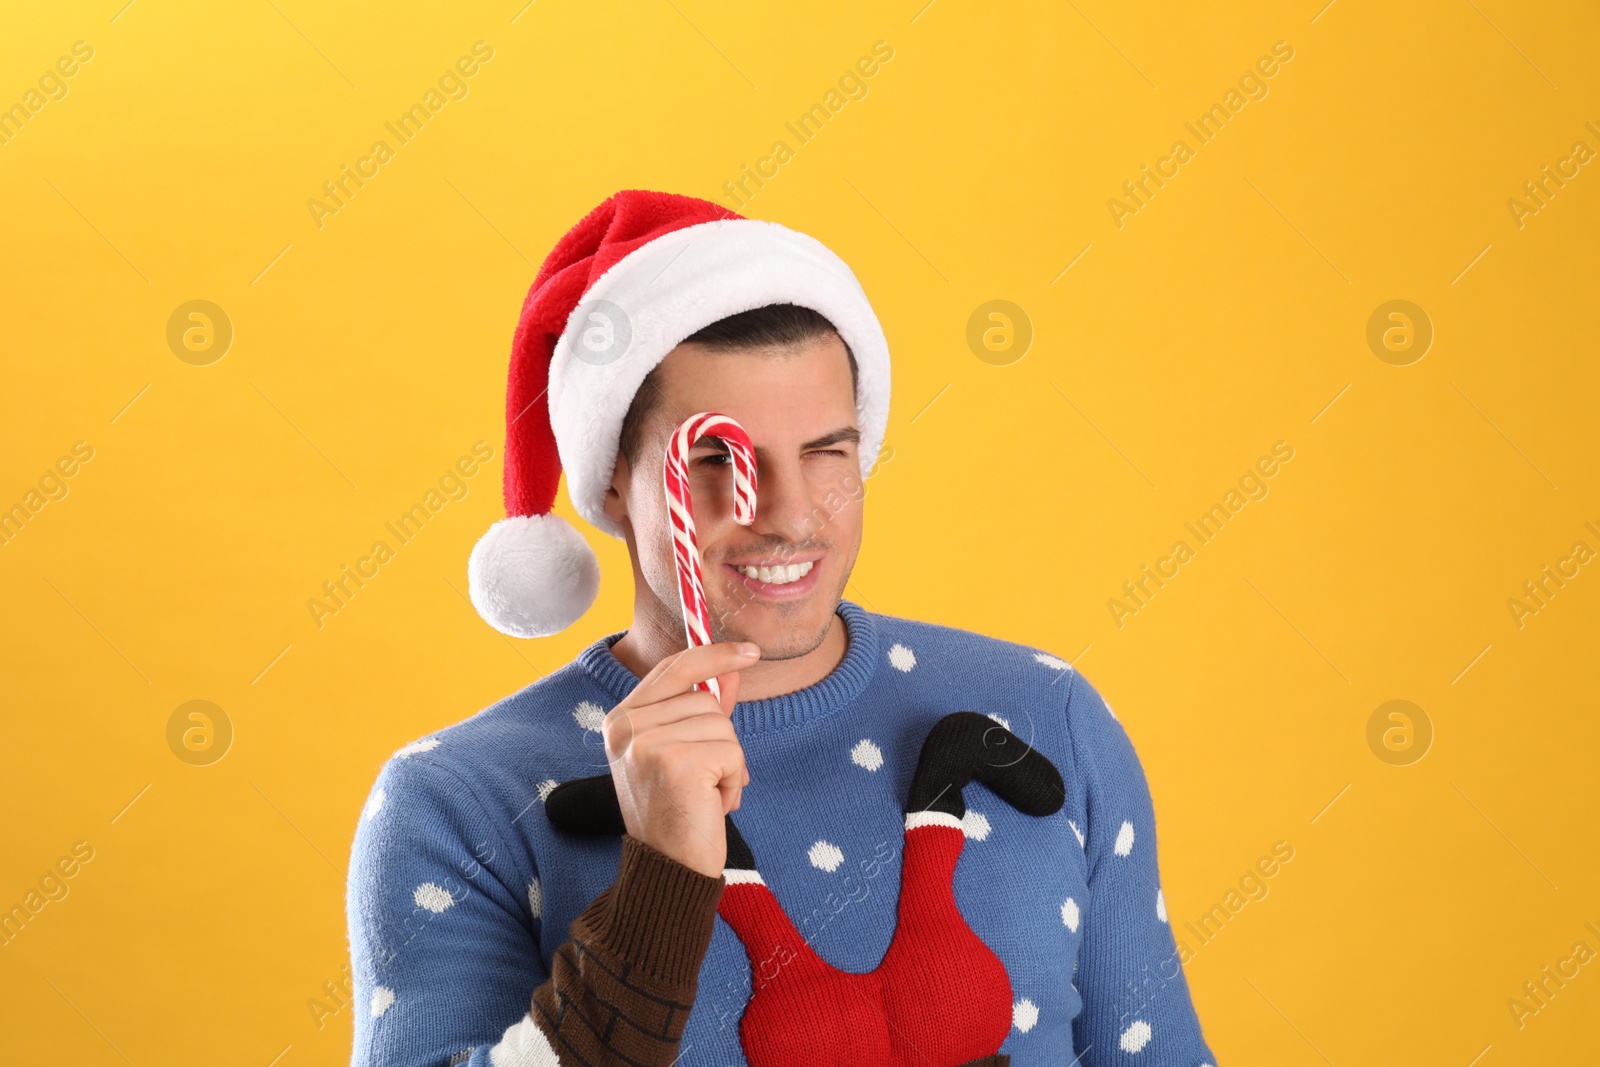 Photo of Handsome man in Santa hat holding candy cane on yellow background